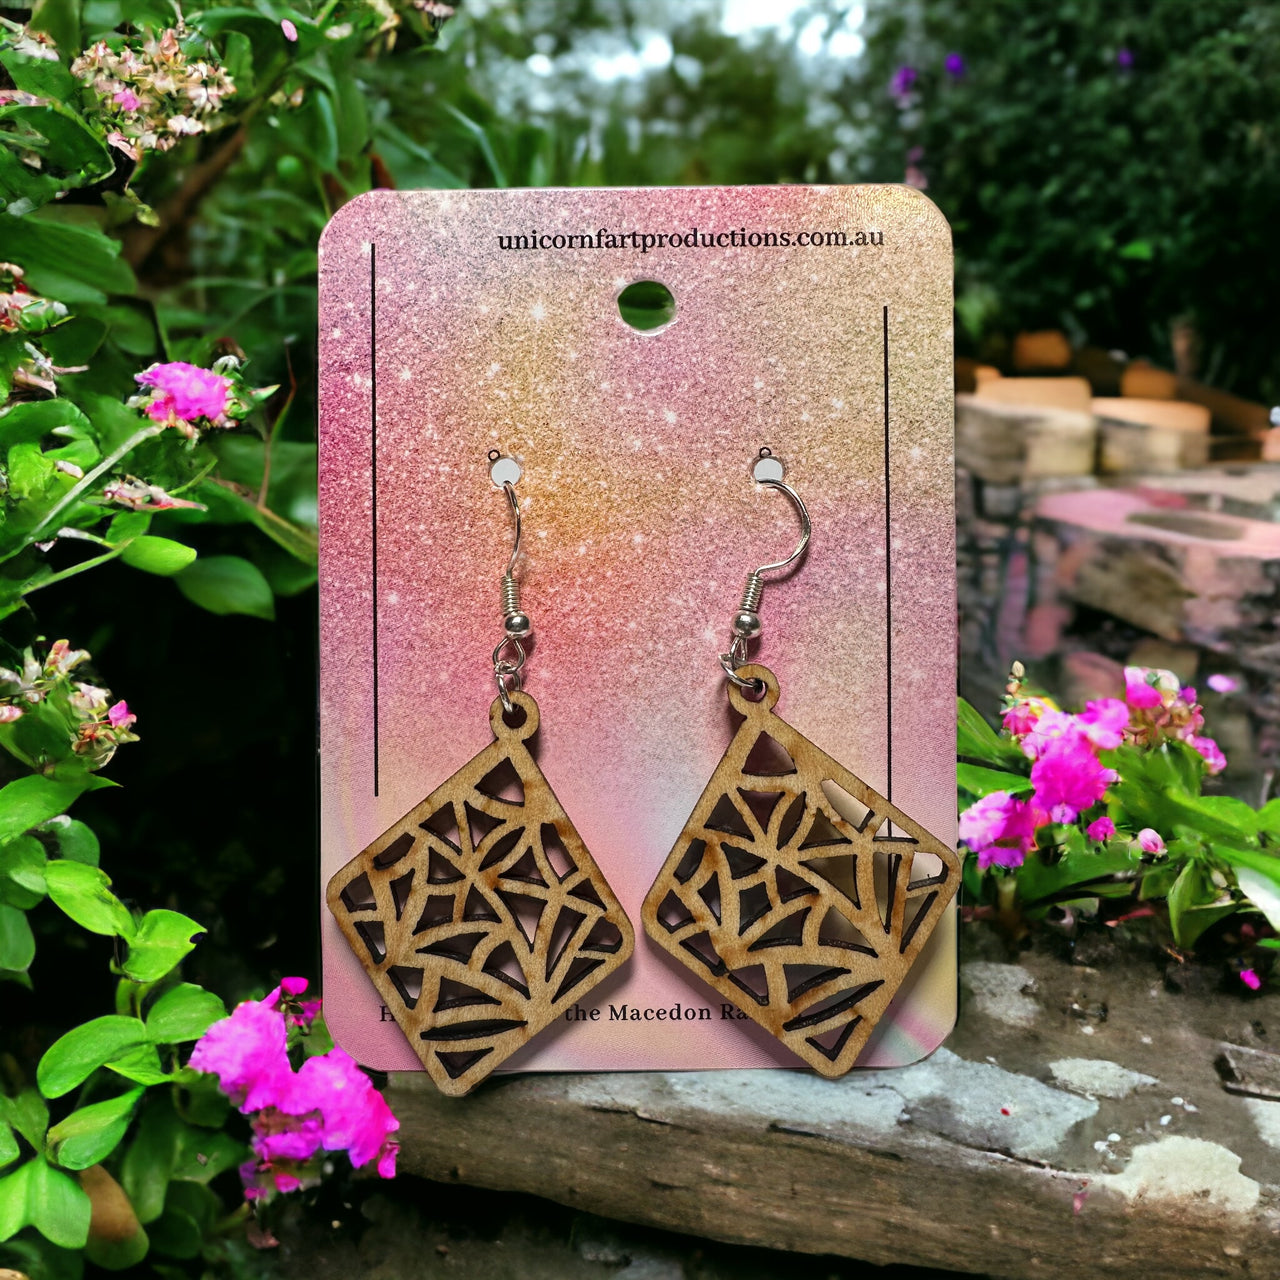 Wooden Handmade earrings crafted from sustainable timber - Nature 007